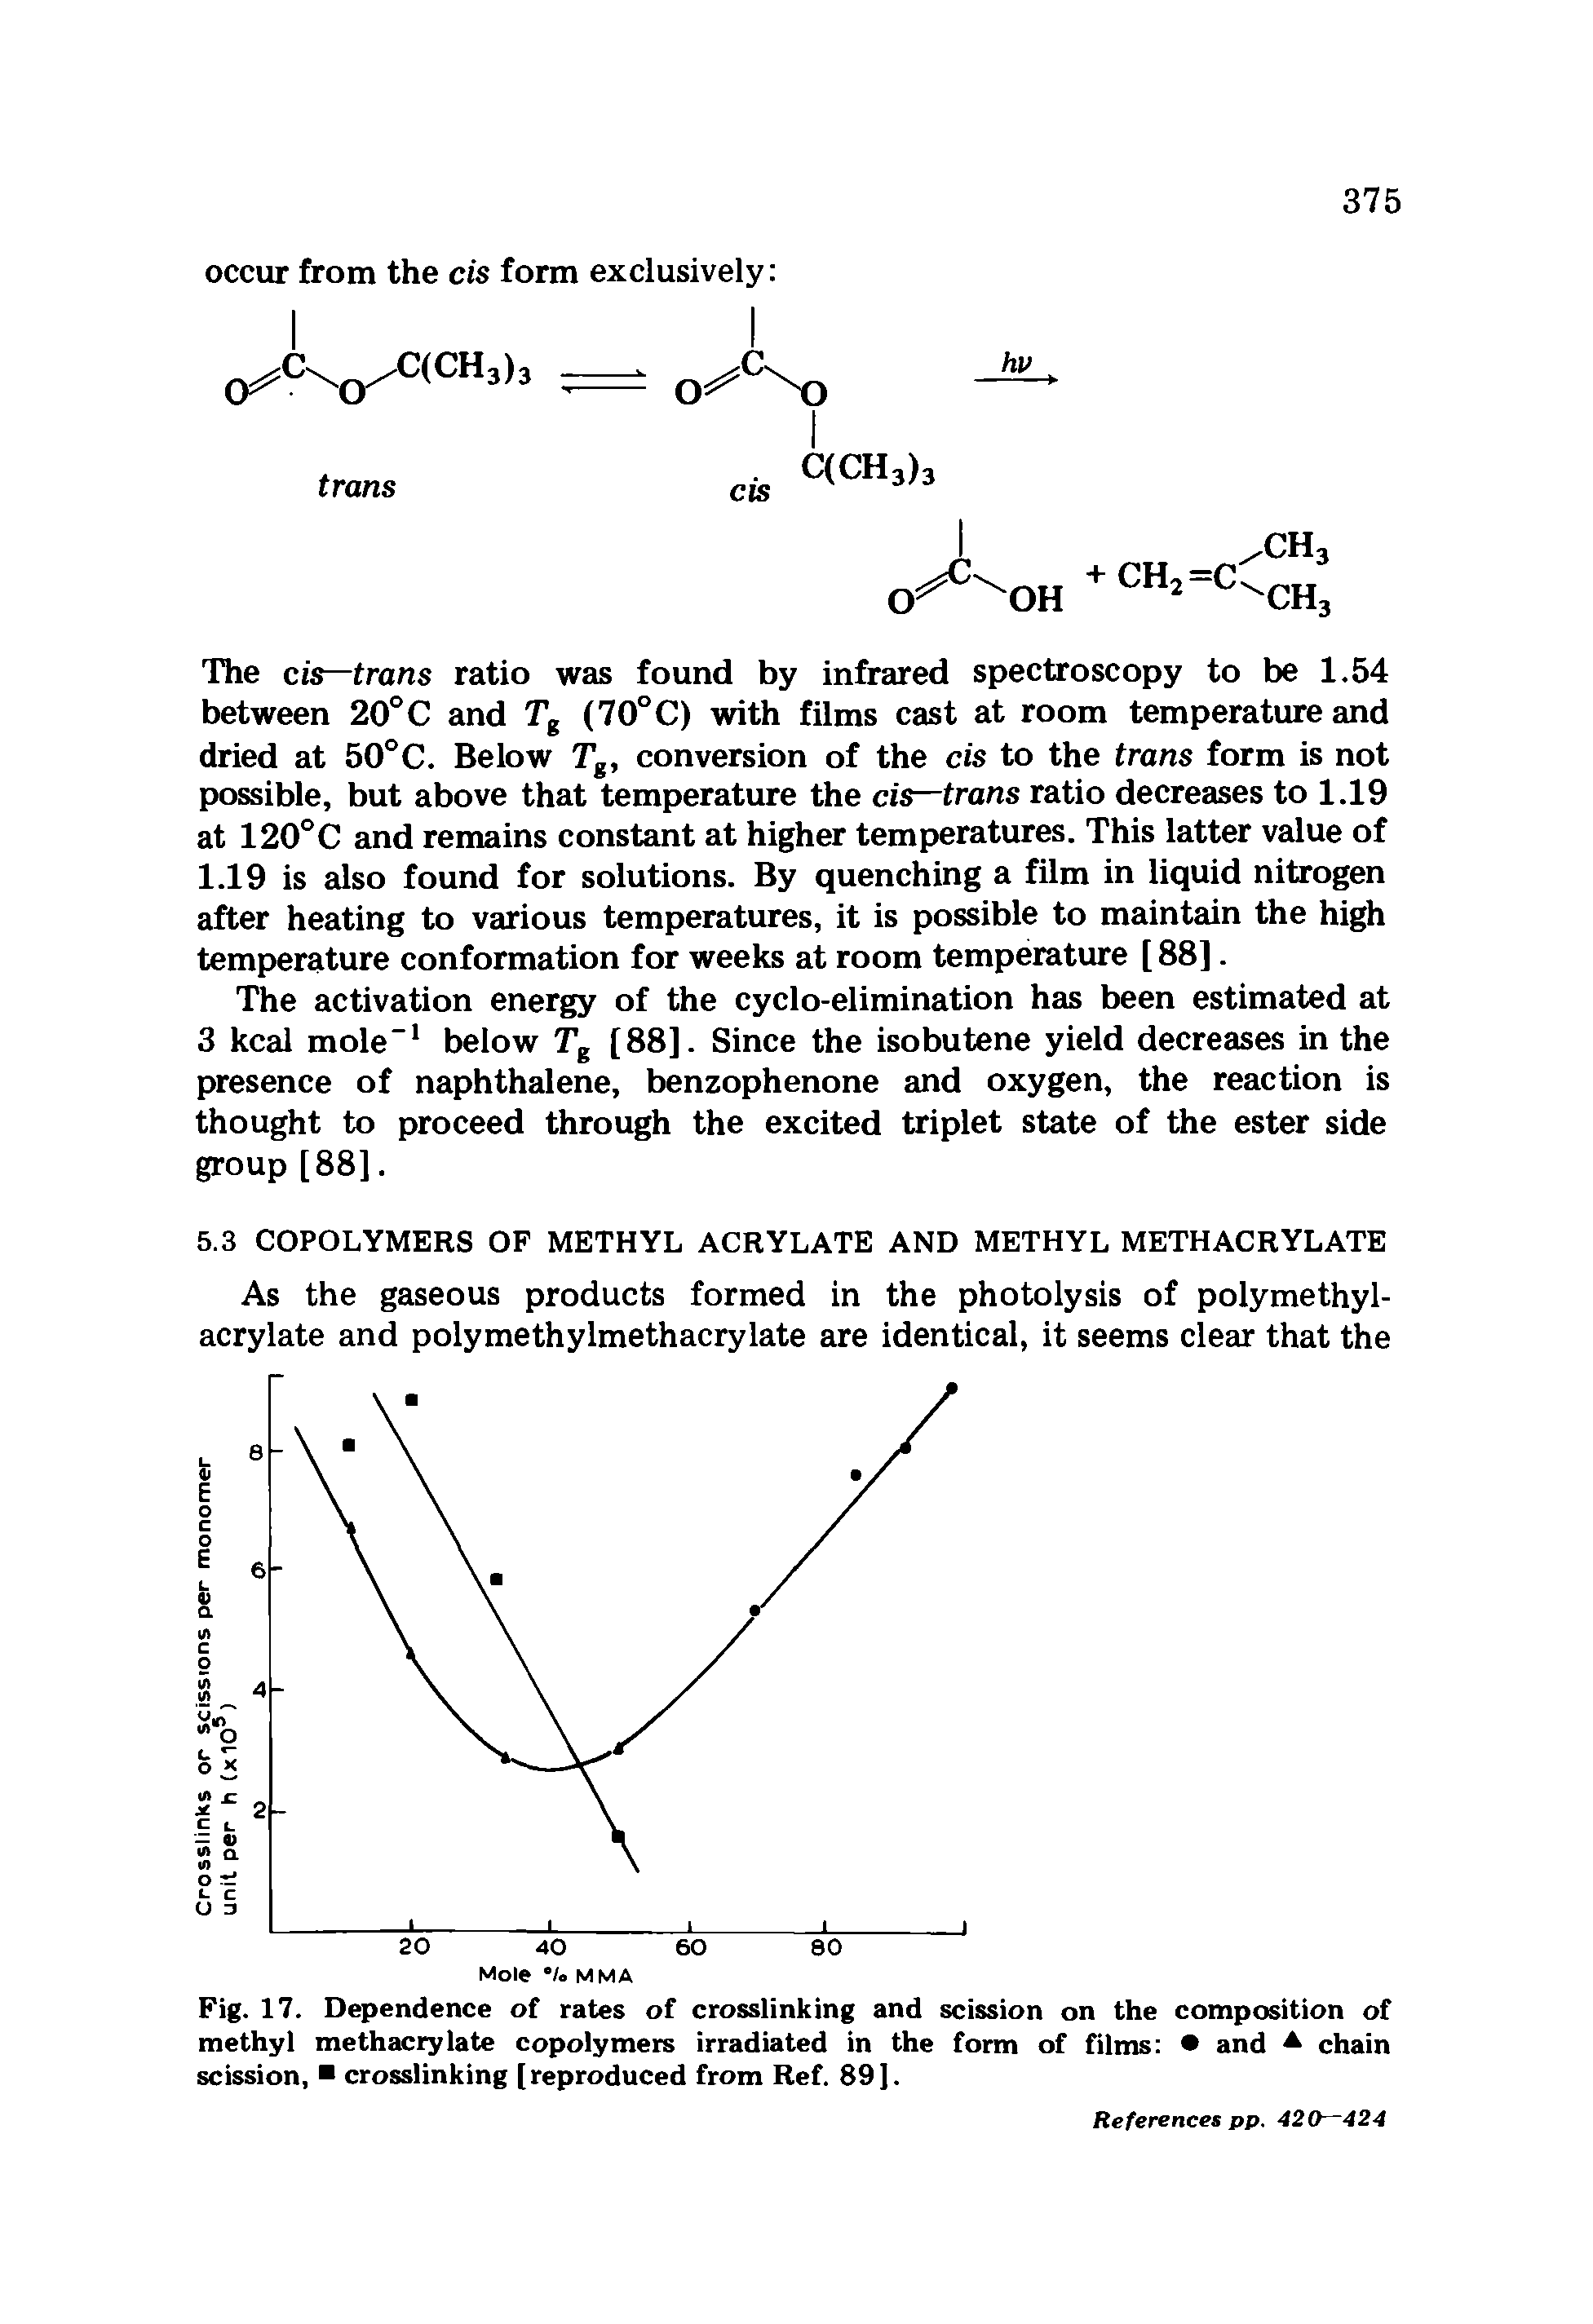 Fig. 17. Dependence of rates of crosslinking and scission on the composition of methyl methacrylate copolymers irradiated in the form of films and A chain scission, crosslinking [reproduced from Ref. 89].